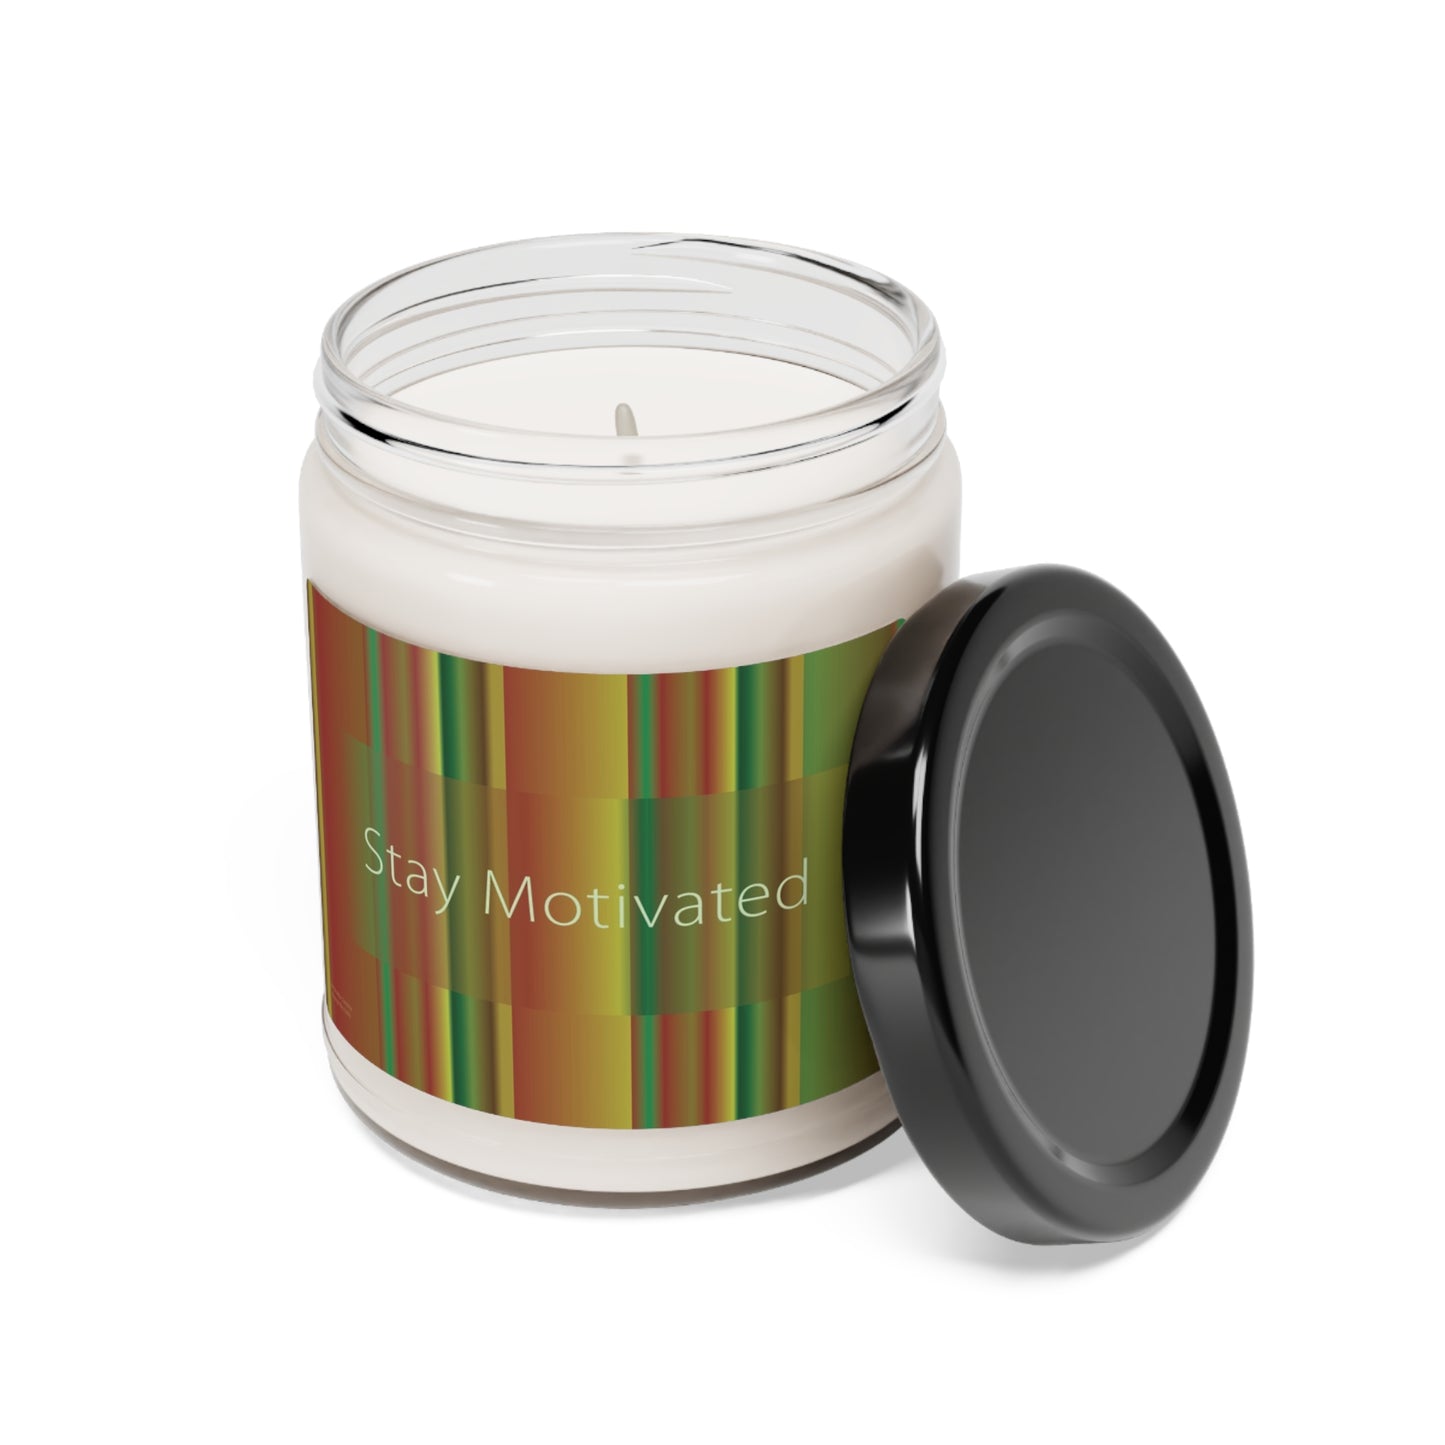 Scented Soy Candle, 9oz Stay Motivated - Design No.1900